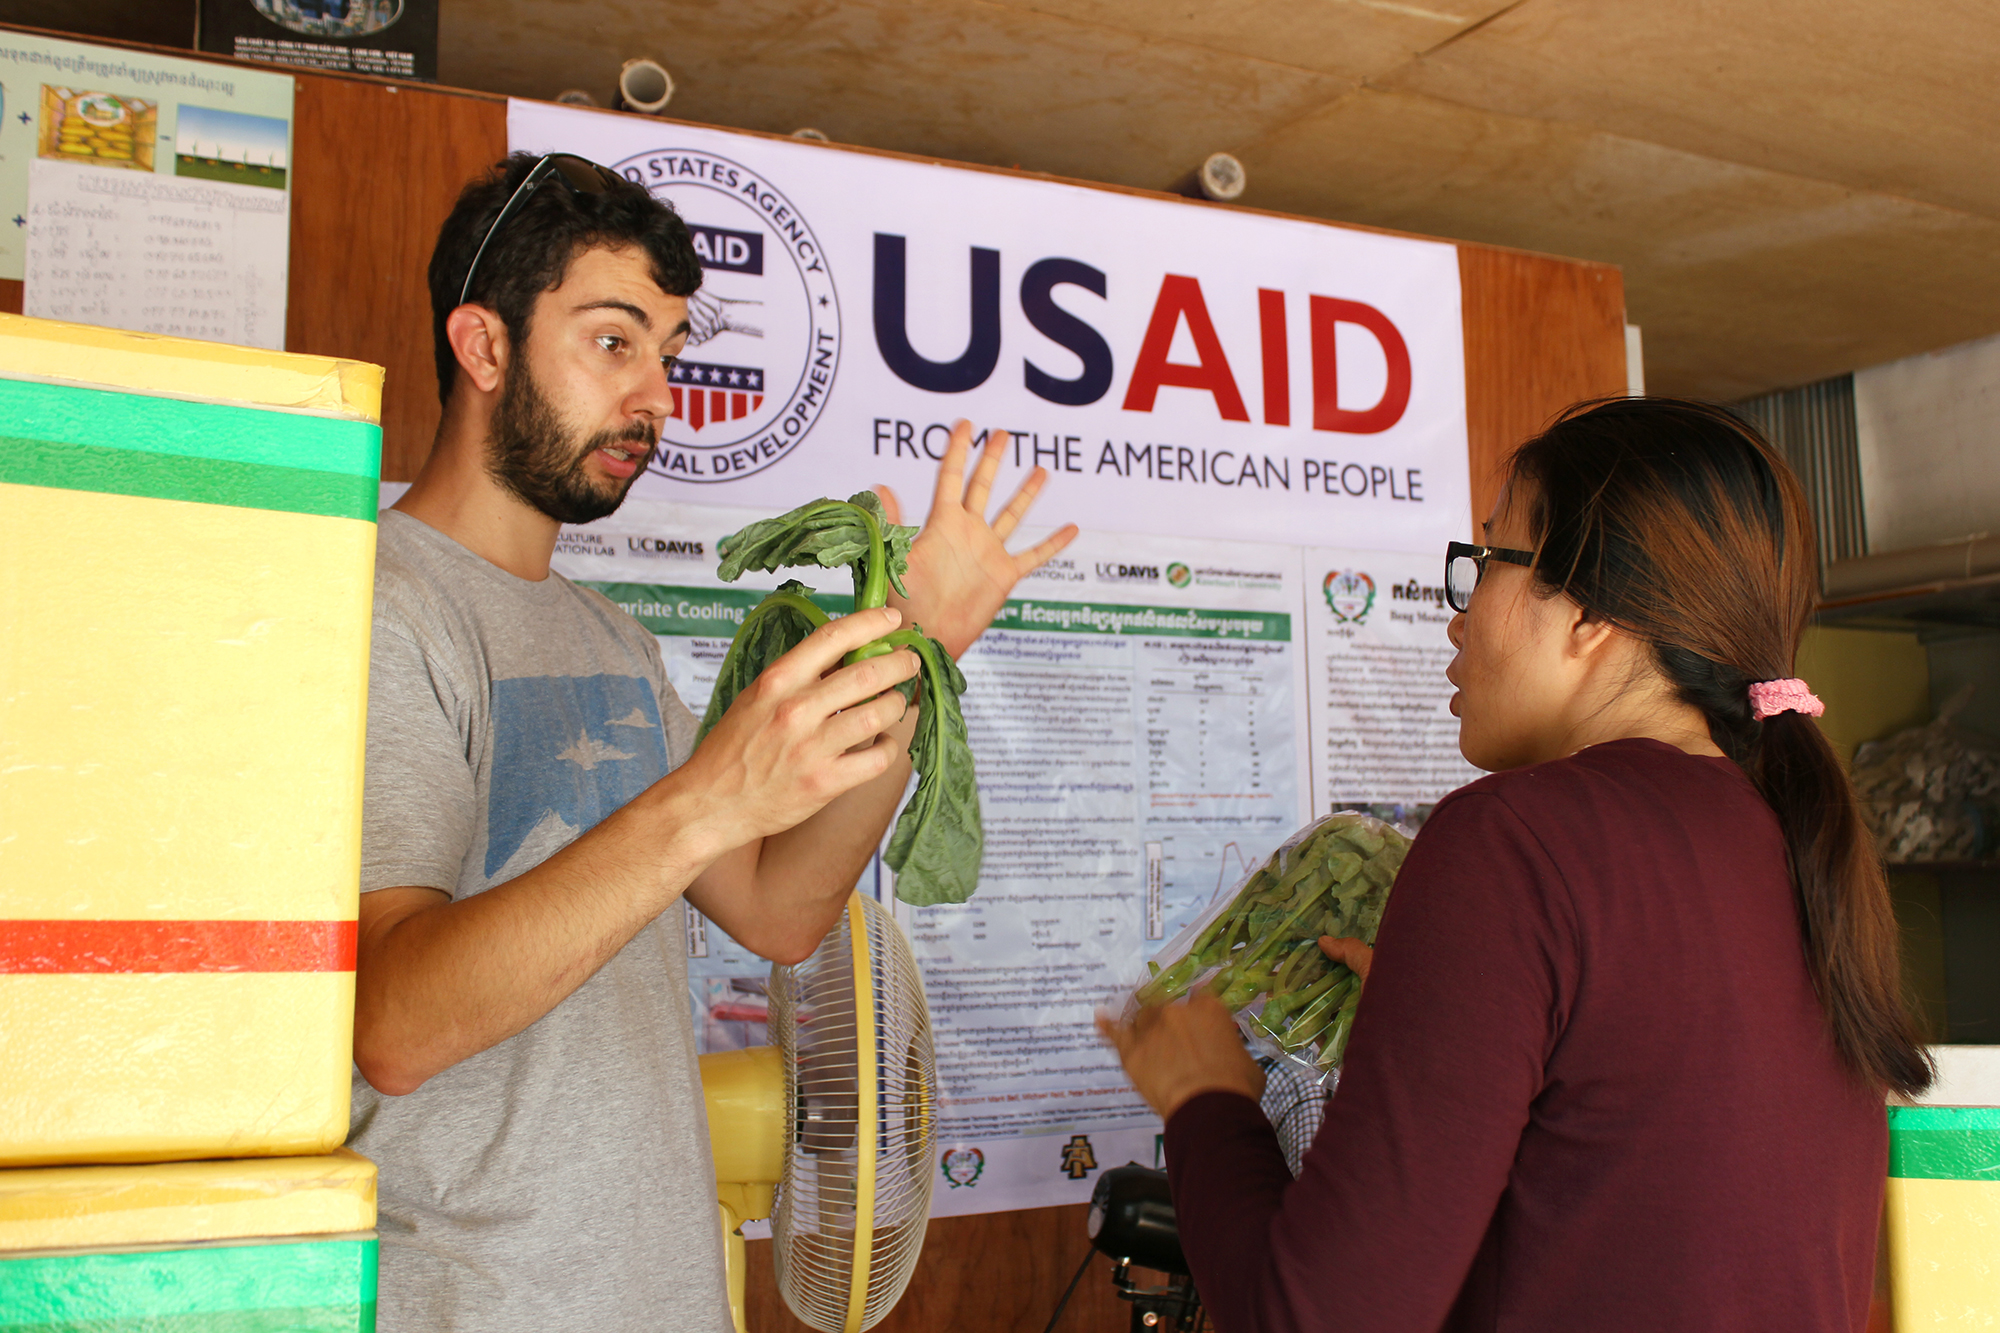 Man gestures with wilted leafy green vegetable to woman listening, with USAID logo in background of packing shed in Cambodia.